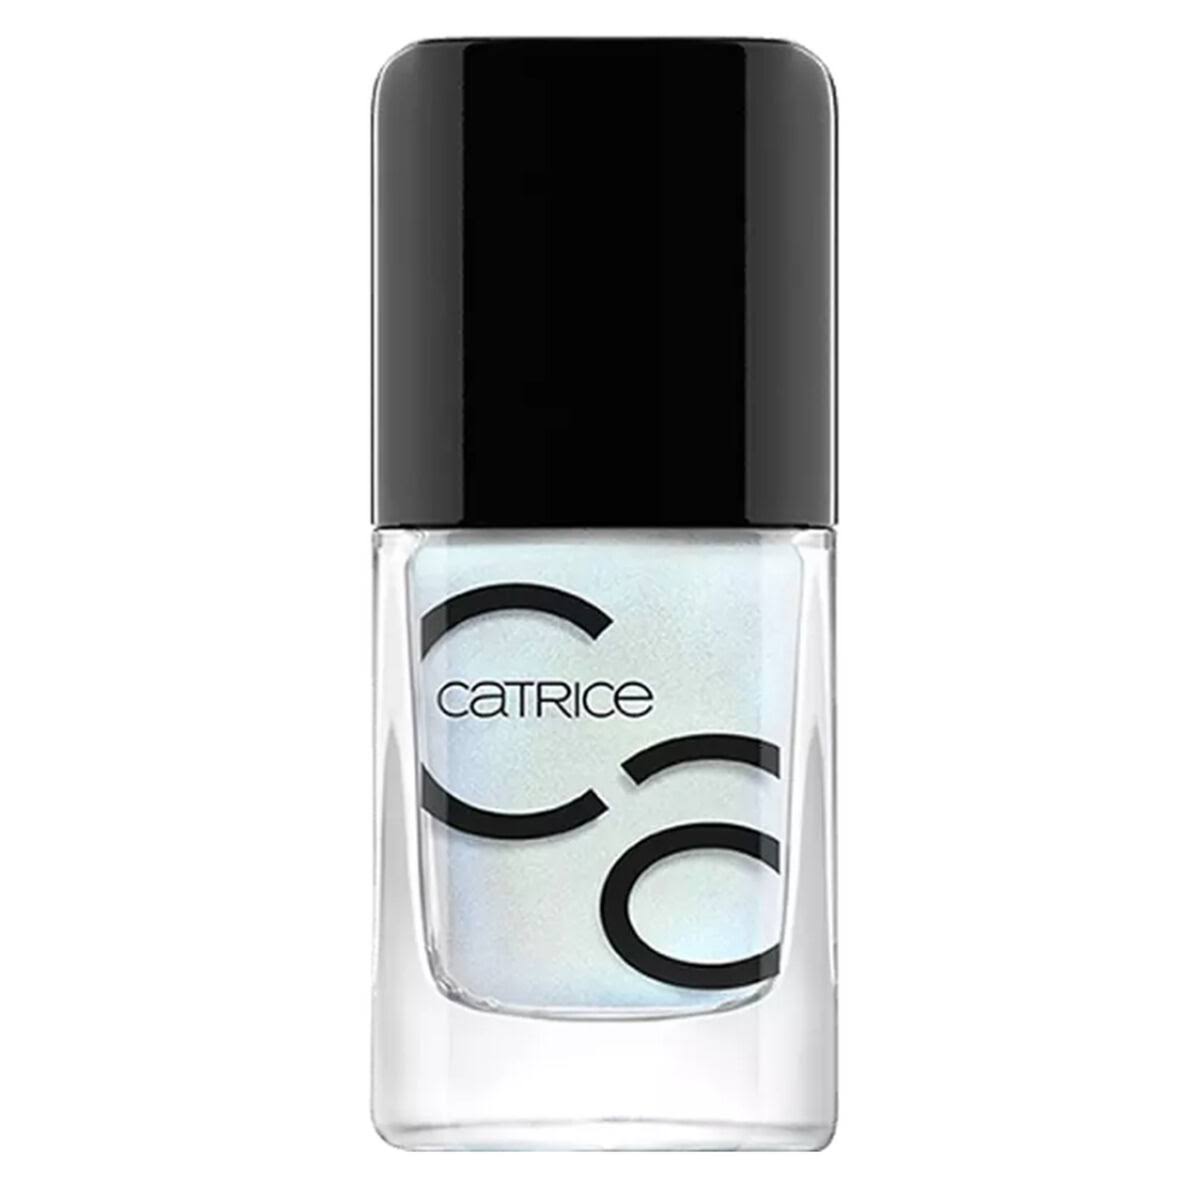 Catrice Iconails Nail Polish Shade 119 Stardust in A Bottle 10,5 ml